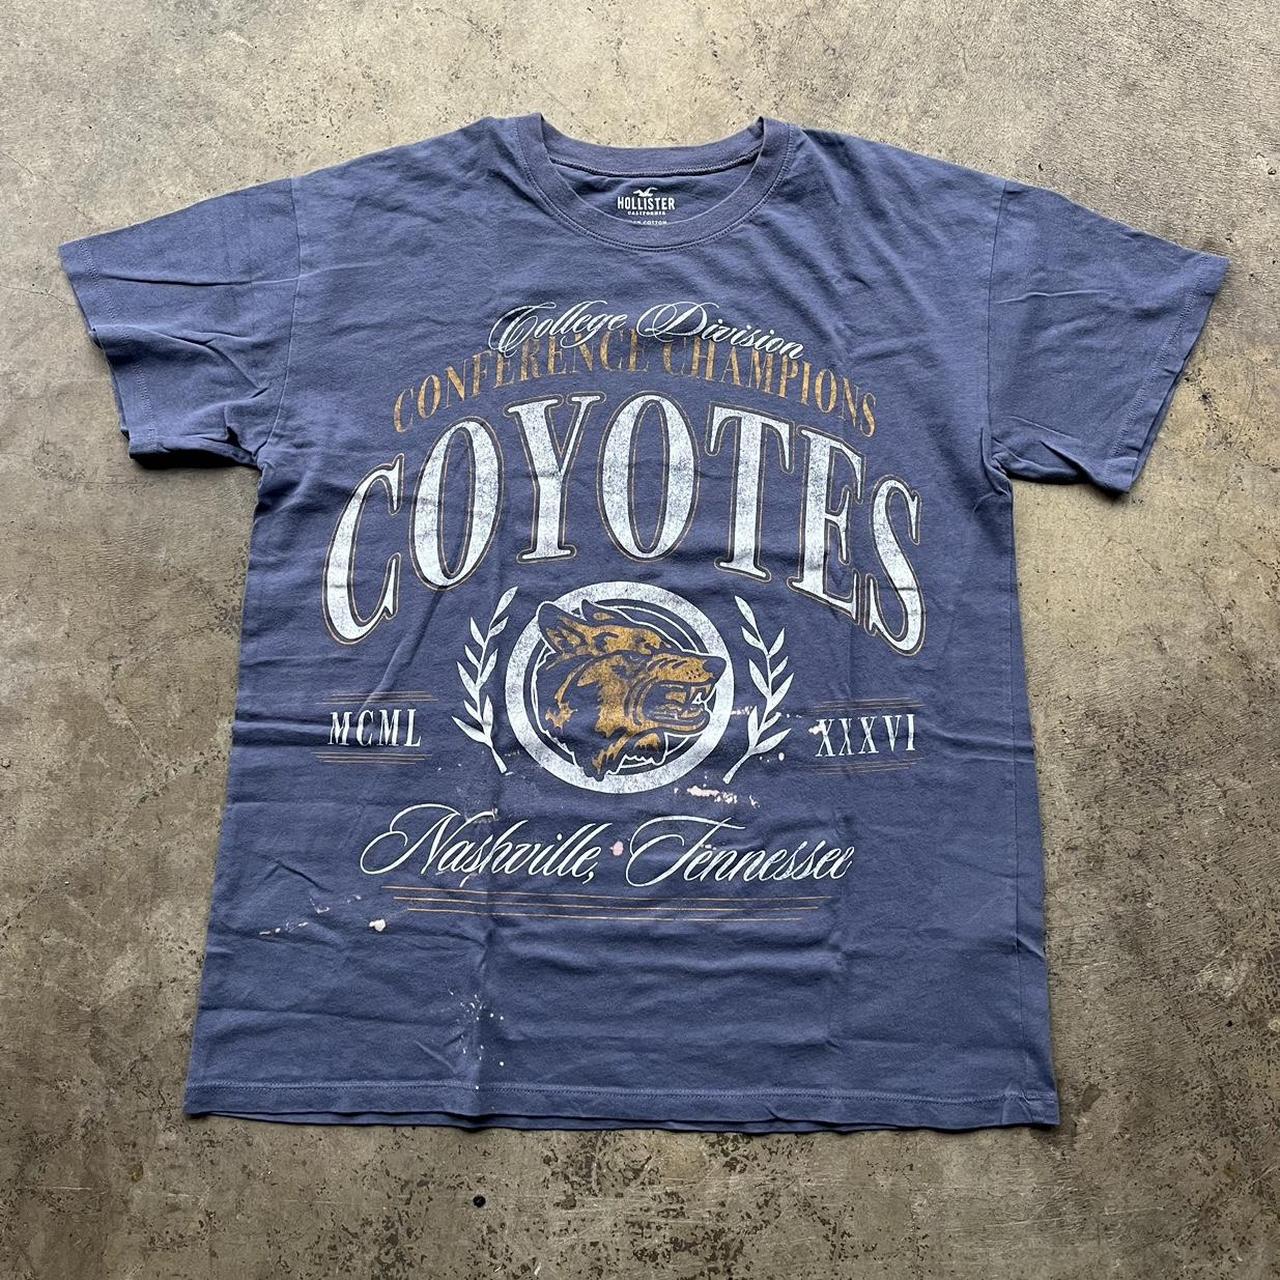 Hollister 100% cotton Coyotes T-Shirt. Some bleach